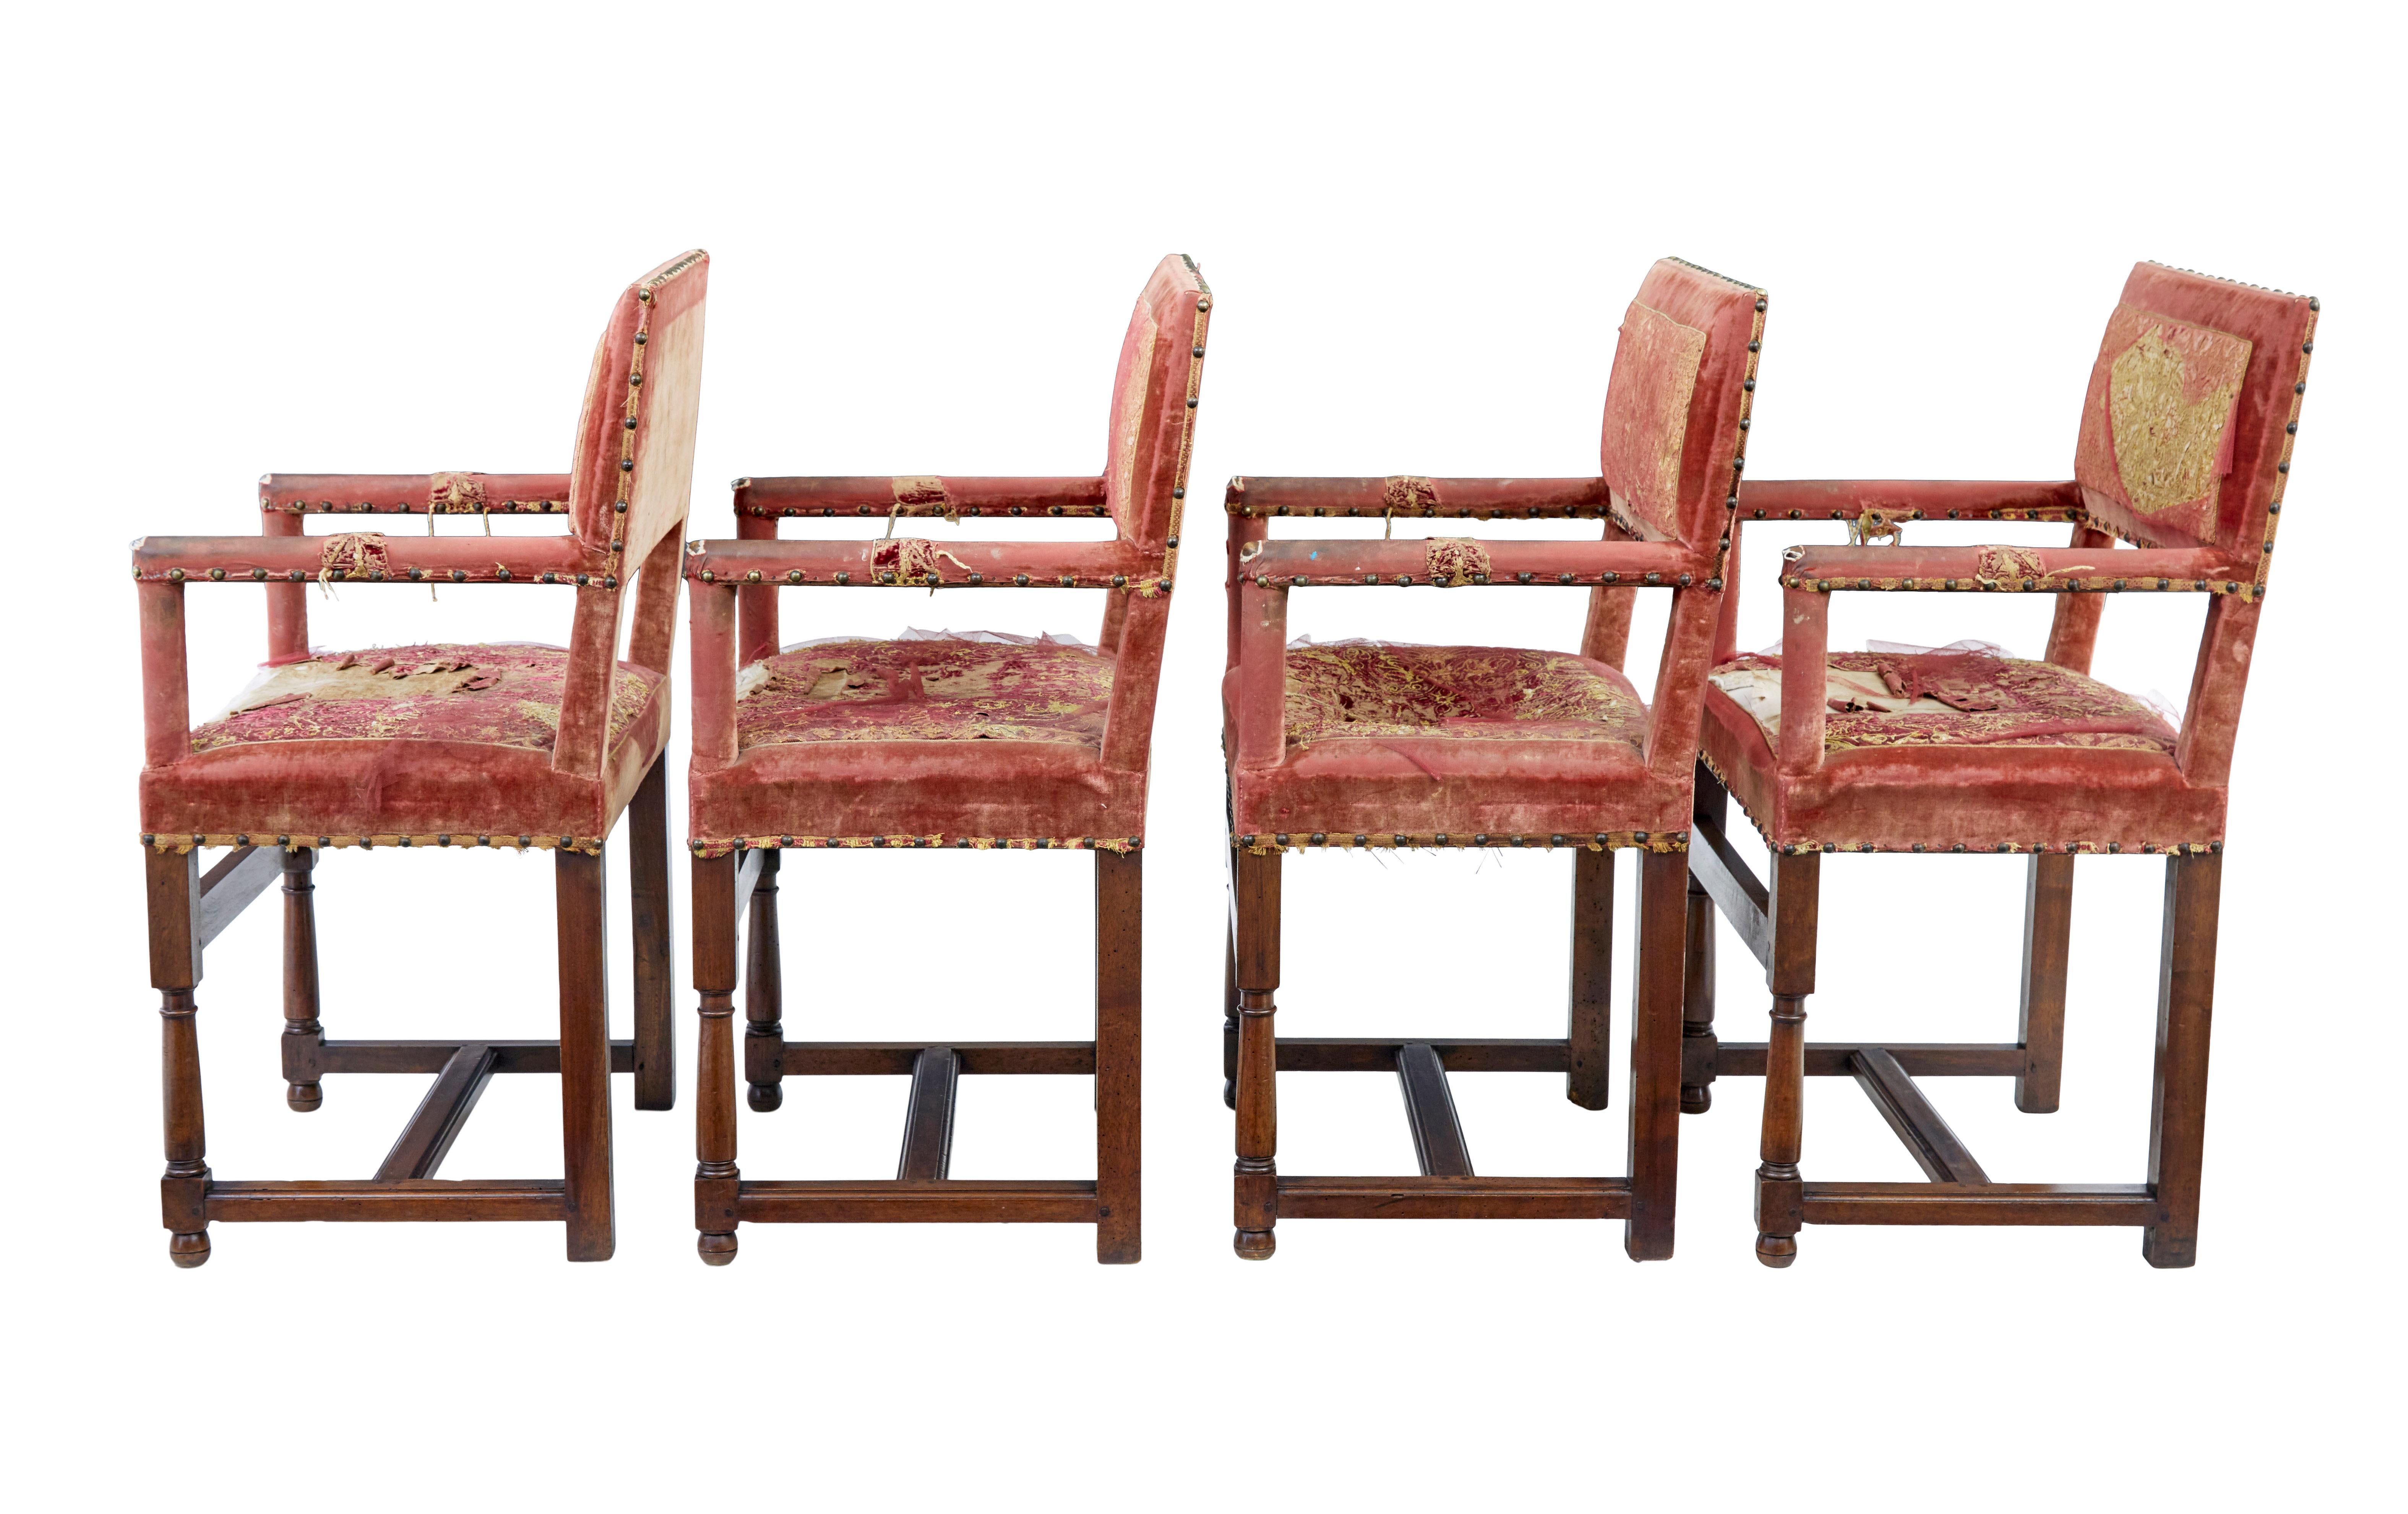 Set of 4 19th century walnut coronation armchairs circa 1860.

We are pleased to offer this rare set of 4 coronation chairs.  Straight arms and back, standing on front turned legs united to the back legs by stretcher.  All made from solid